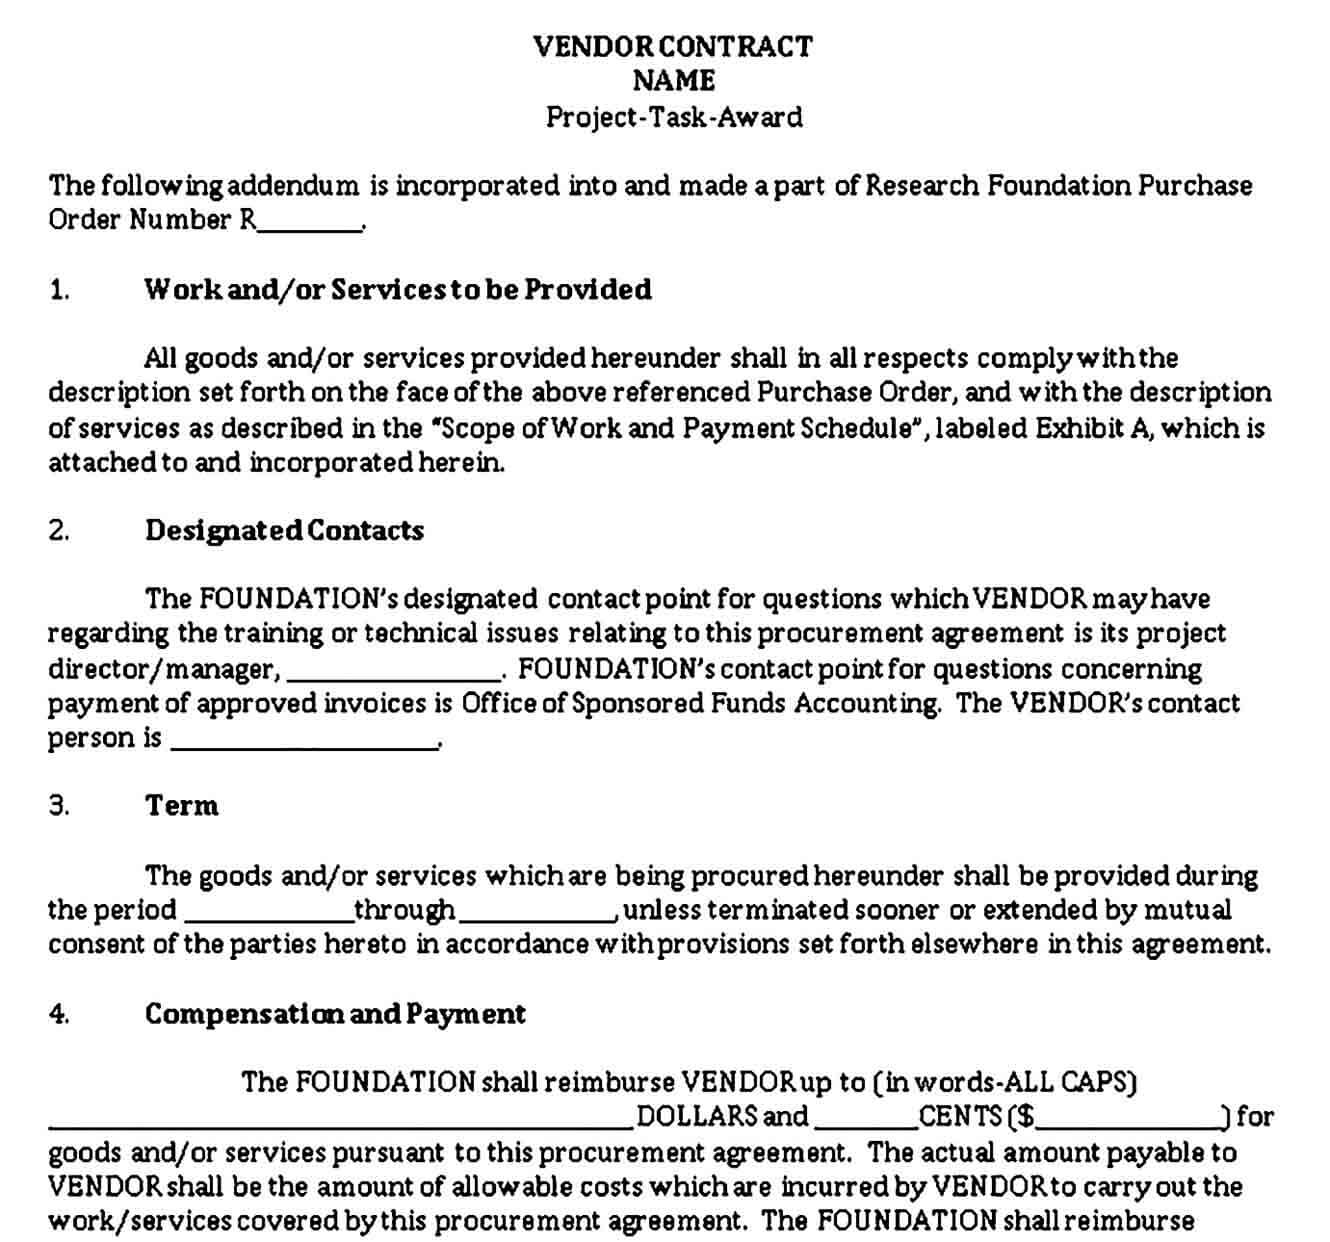 Project Vendor Contract Agreement